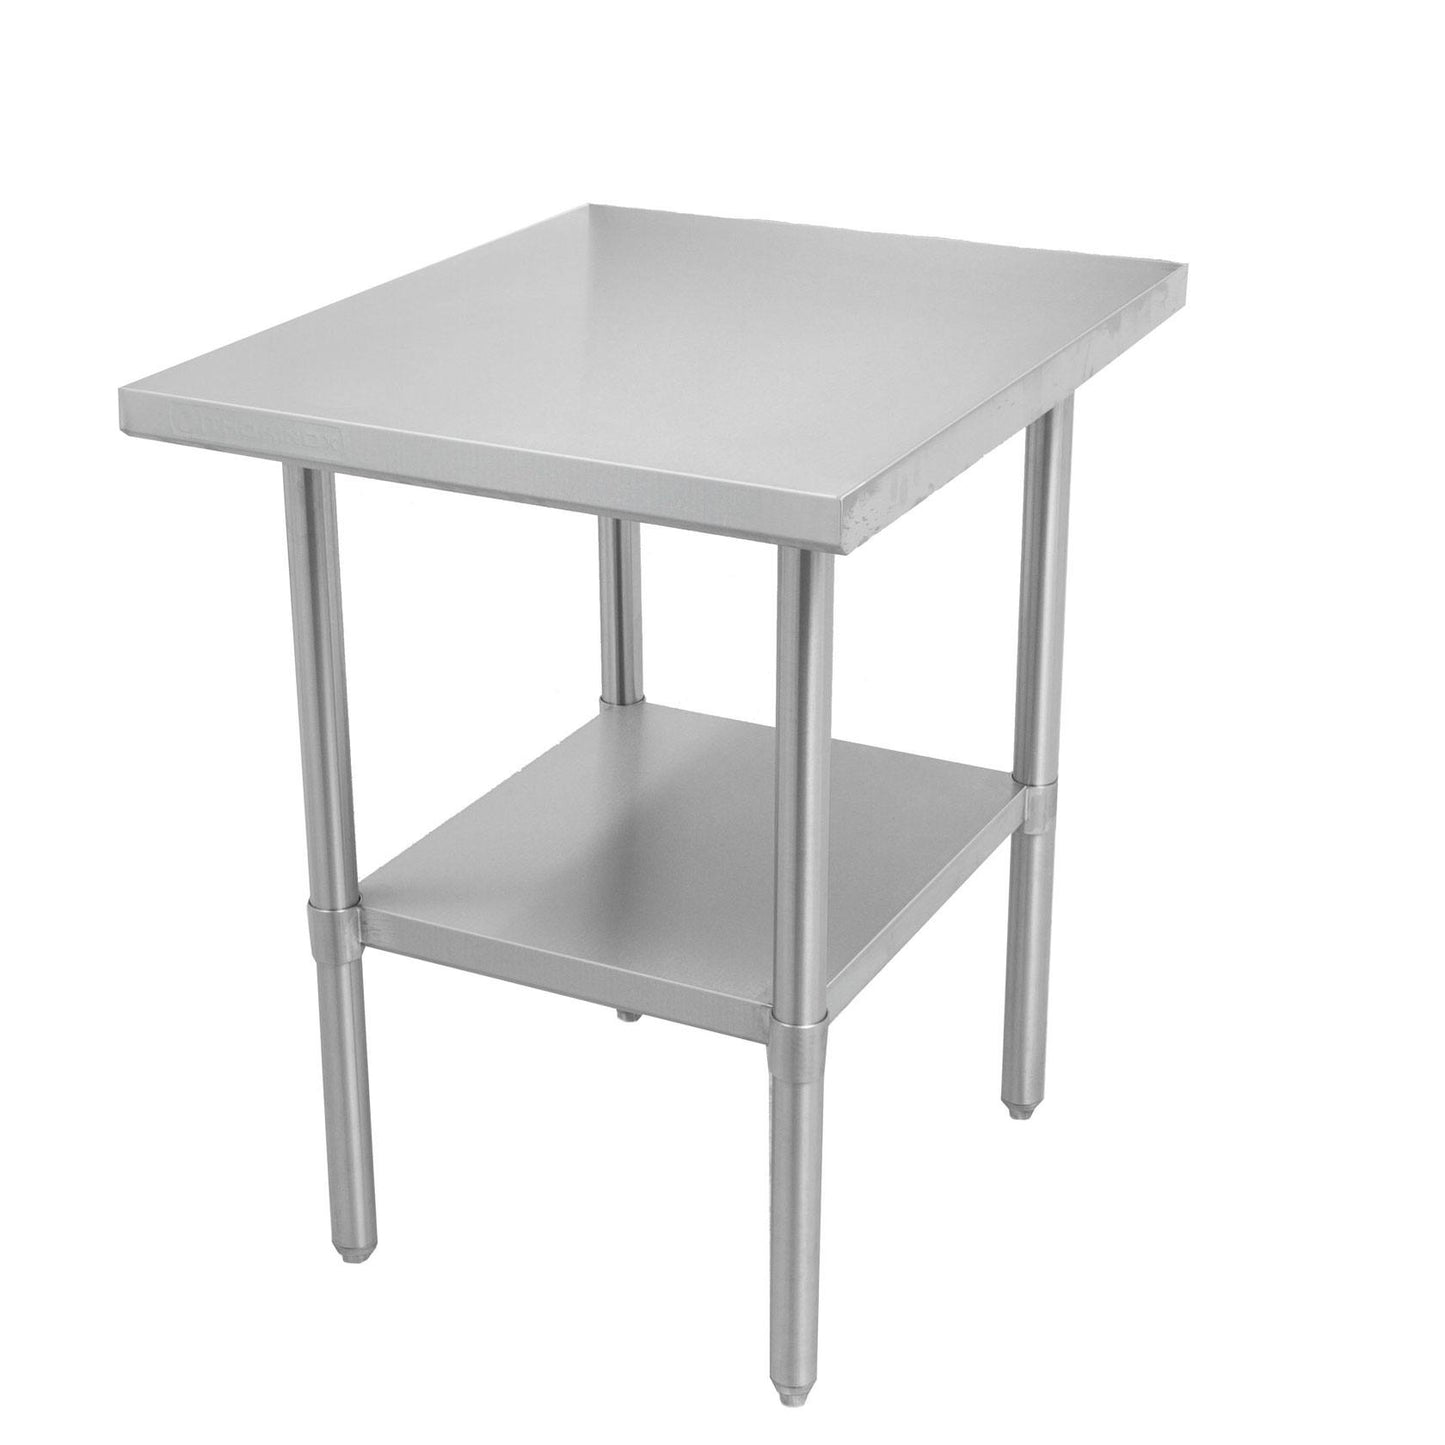 Thorinox DSST-2430-SS Table, 30"W x 24"D x 34"H, Stainless Steel Table with Stainless Steel Shelf